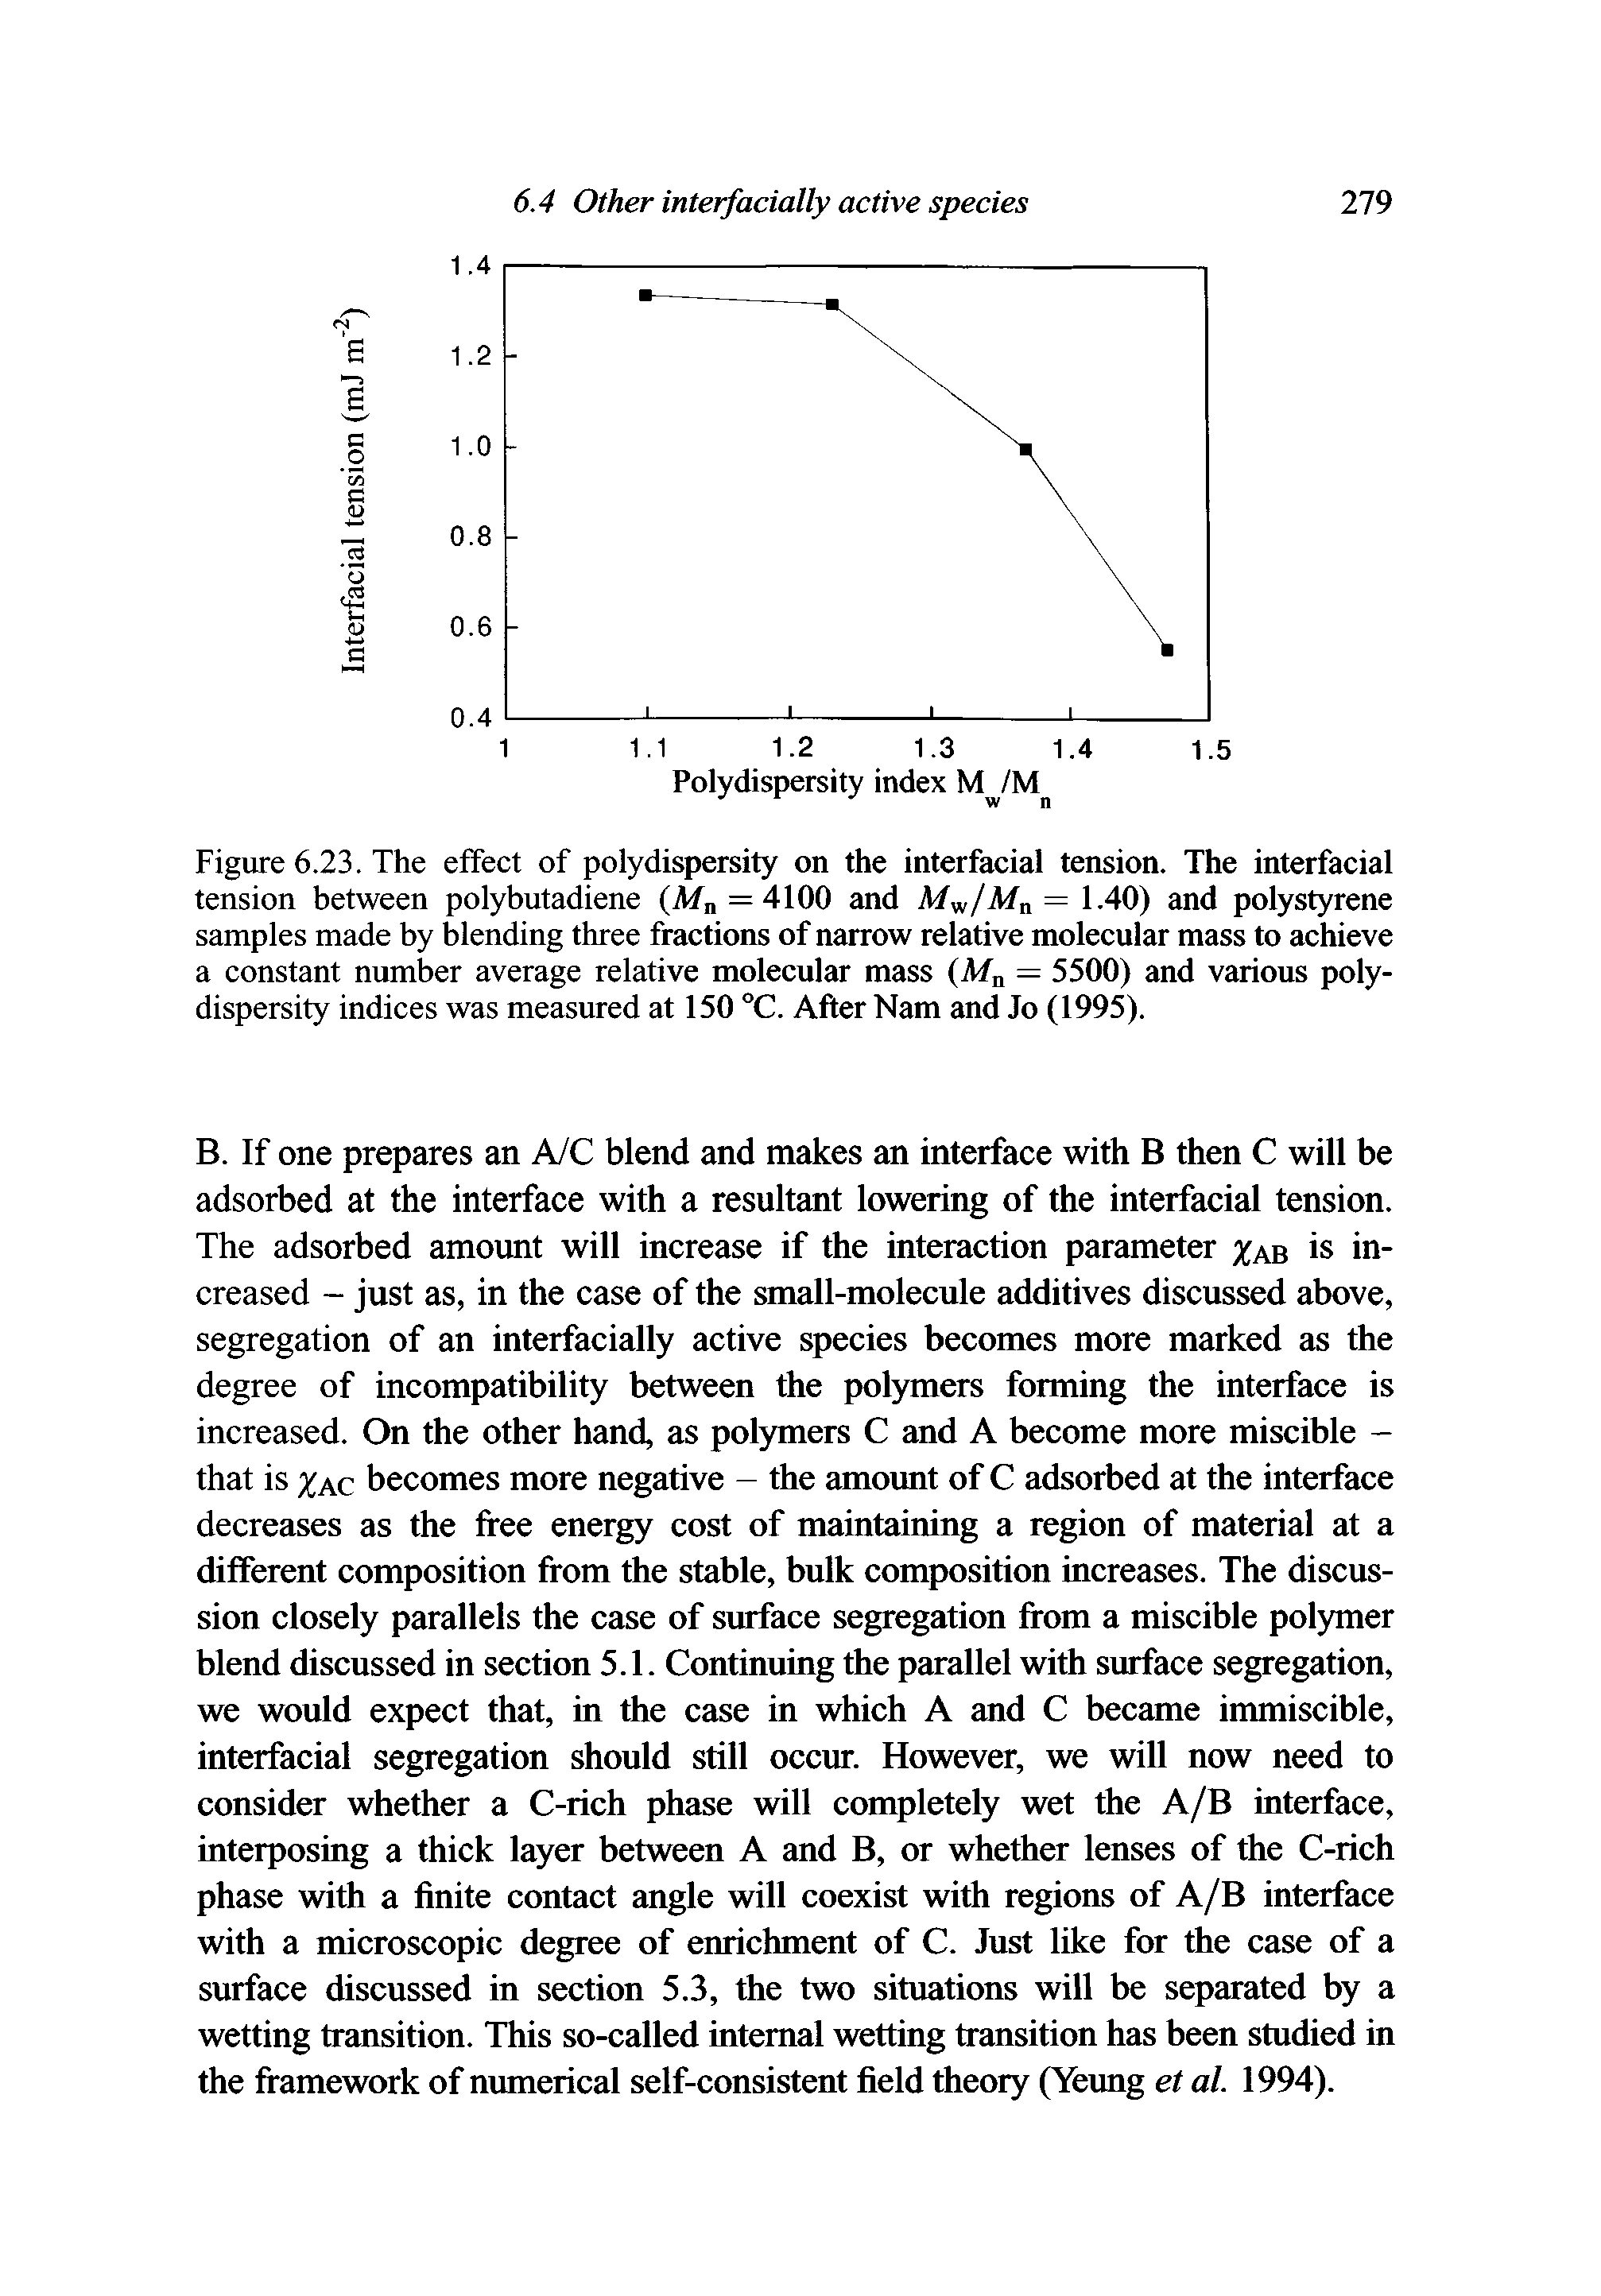 Figure 6.23. The eifect of polydispersity on the interfacial tension. The interfacial tension between polybutadiene (M = 4100 and Mv,/M = 1.40) and polystyrene samples made by blending three fractions of narrow relative molecular mass to achieve a constant number average relative molecular mass (M — 5500) and various polydispersity indices was measured at 150 °C. After Nam and Jo (1995).